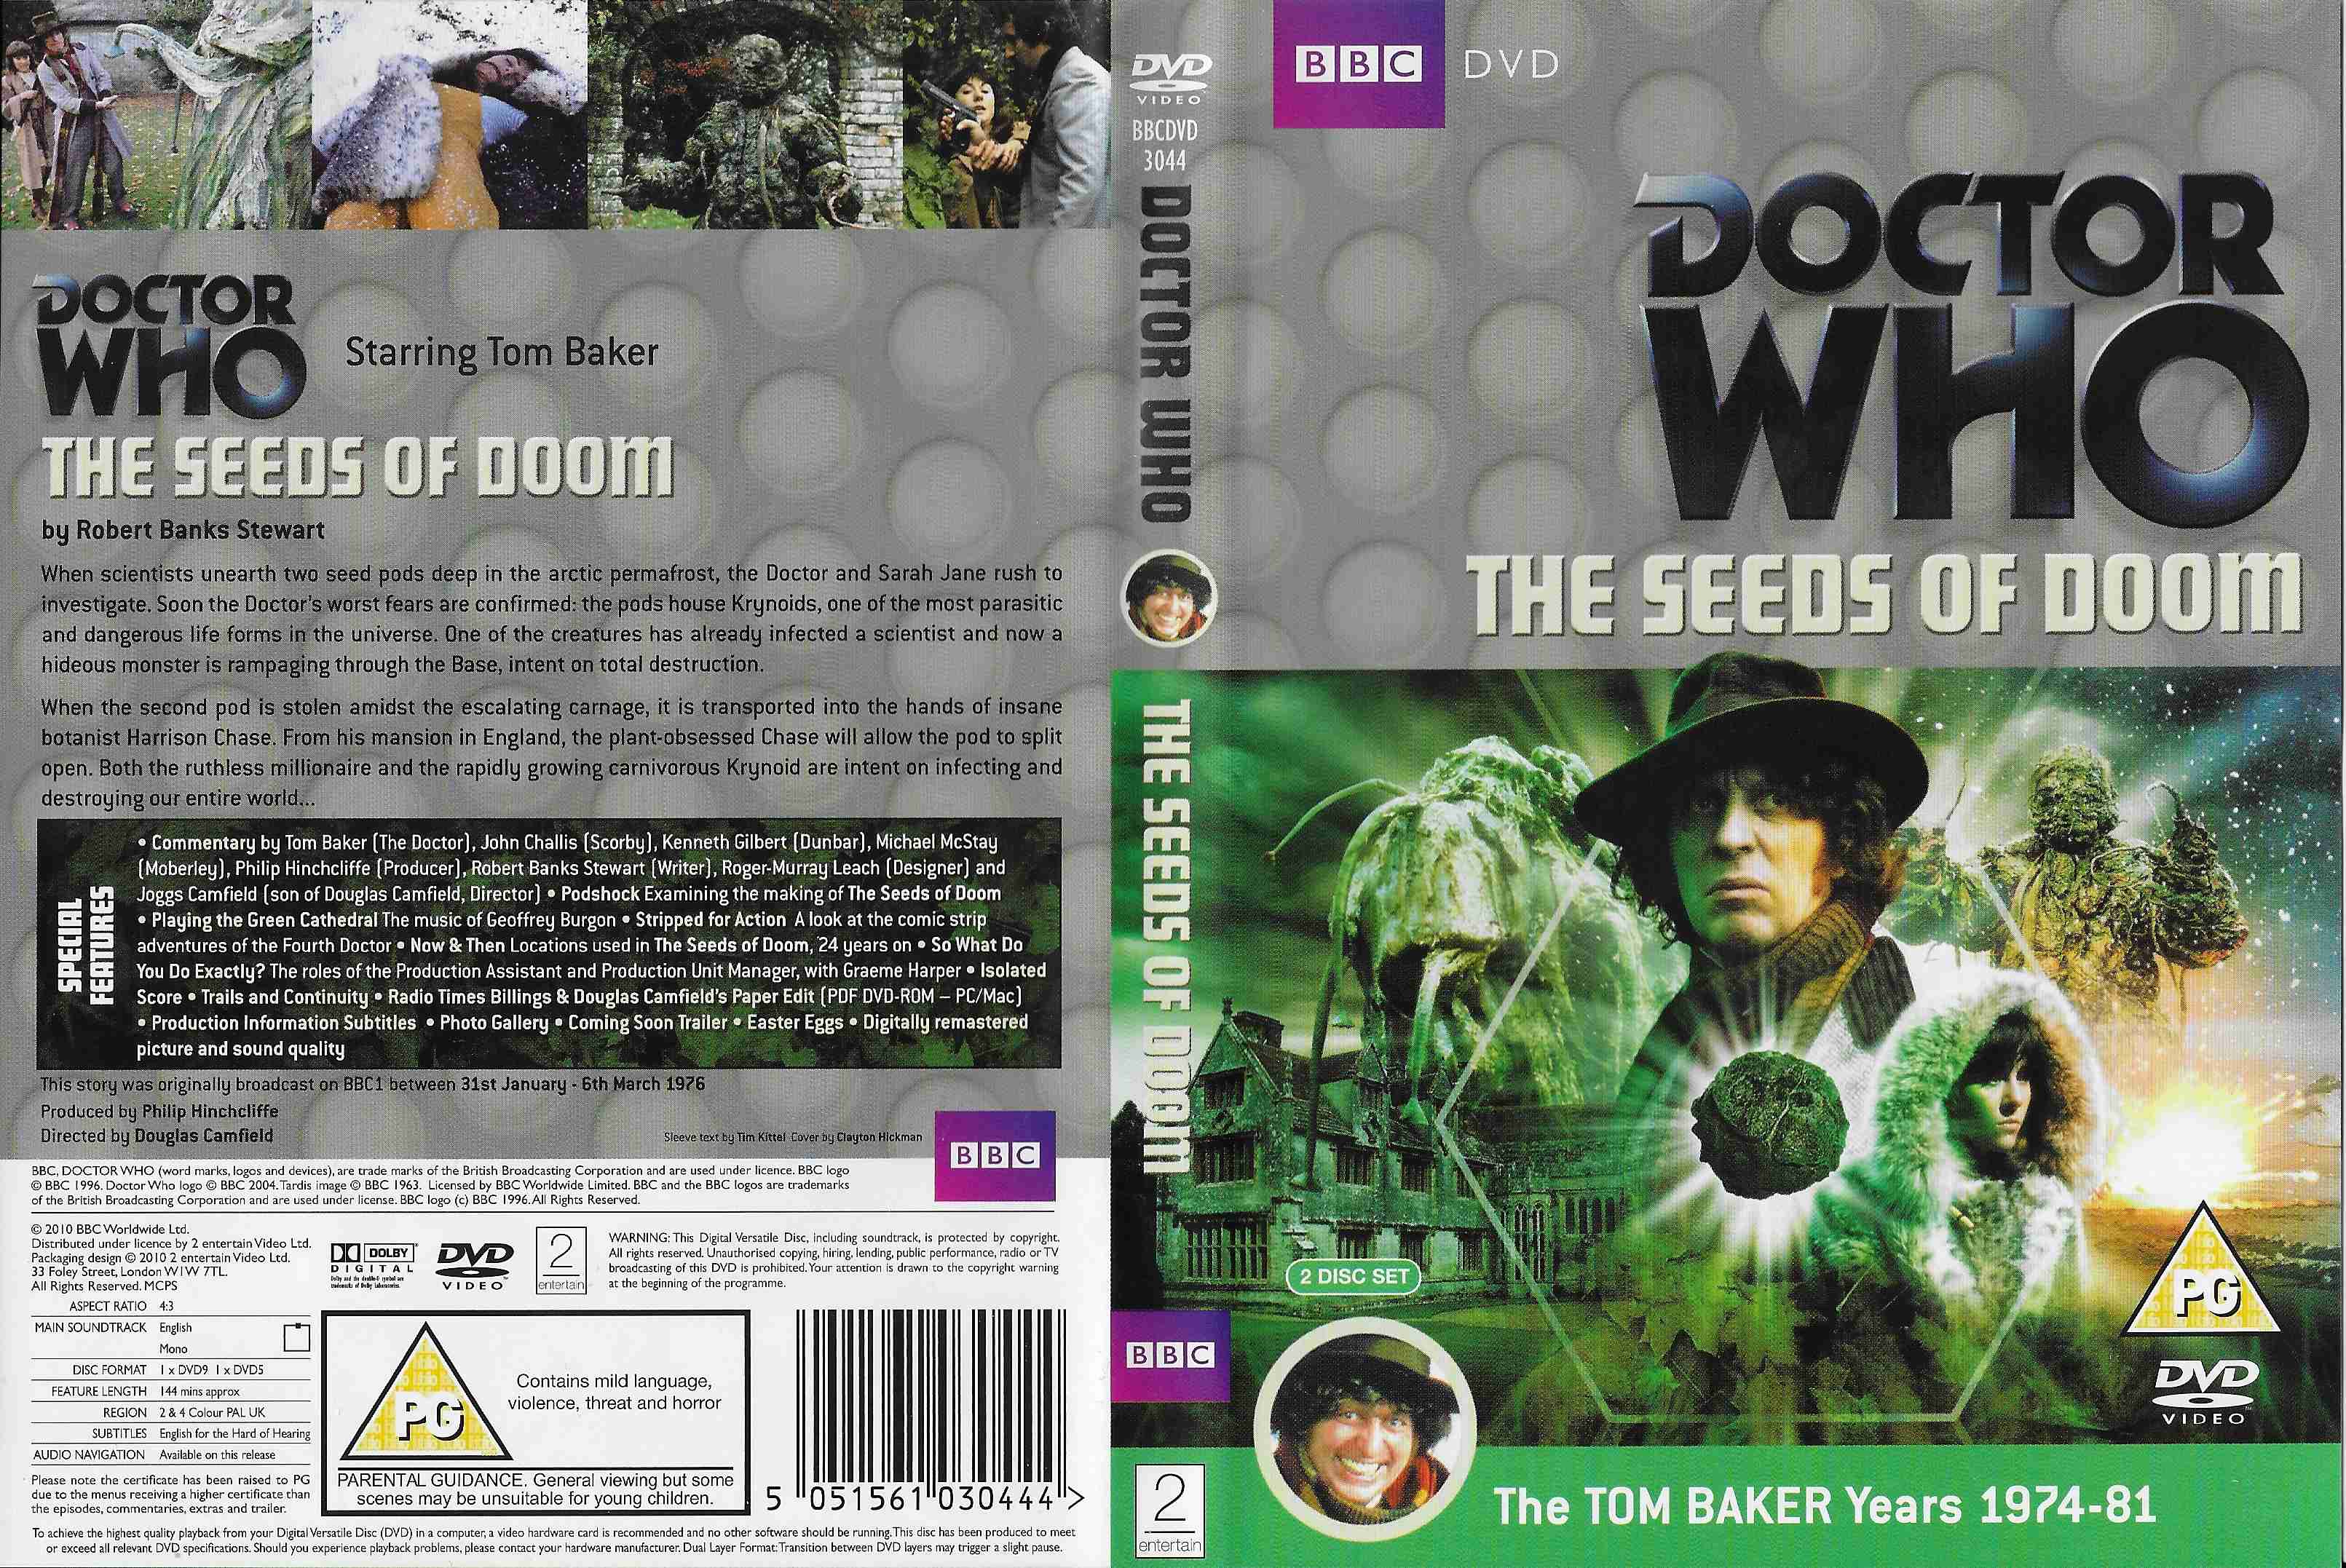 Picture of BBCDVD 3044 Doctor Who - The seeds of doom by artist Robert Banks Stewart from the BBC records and Tapes library